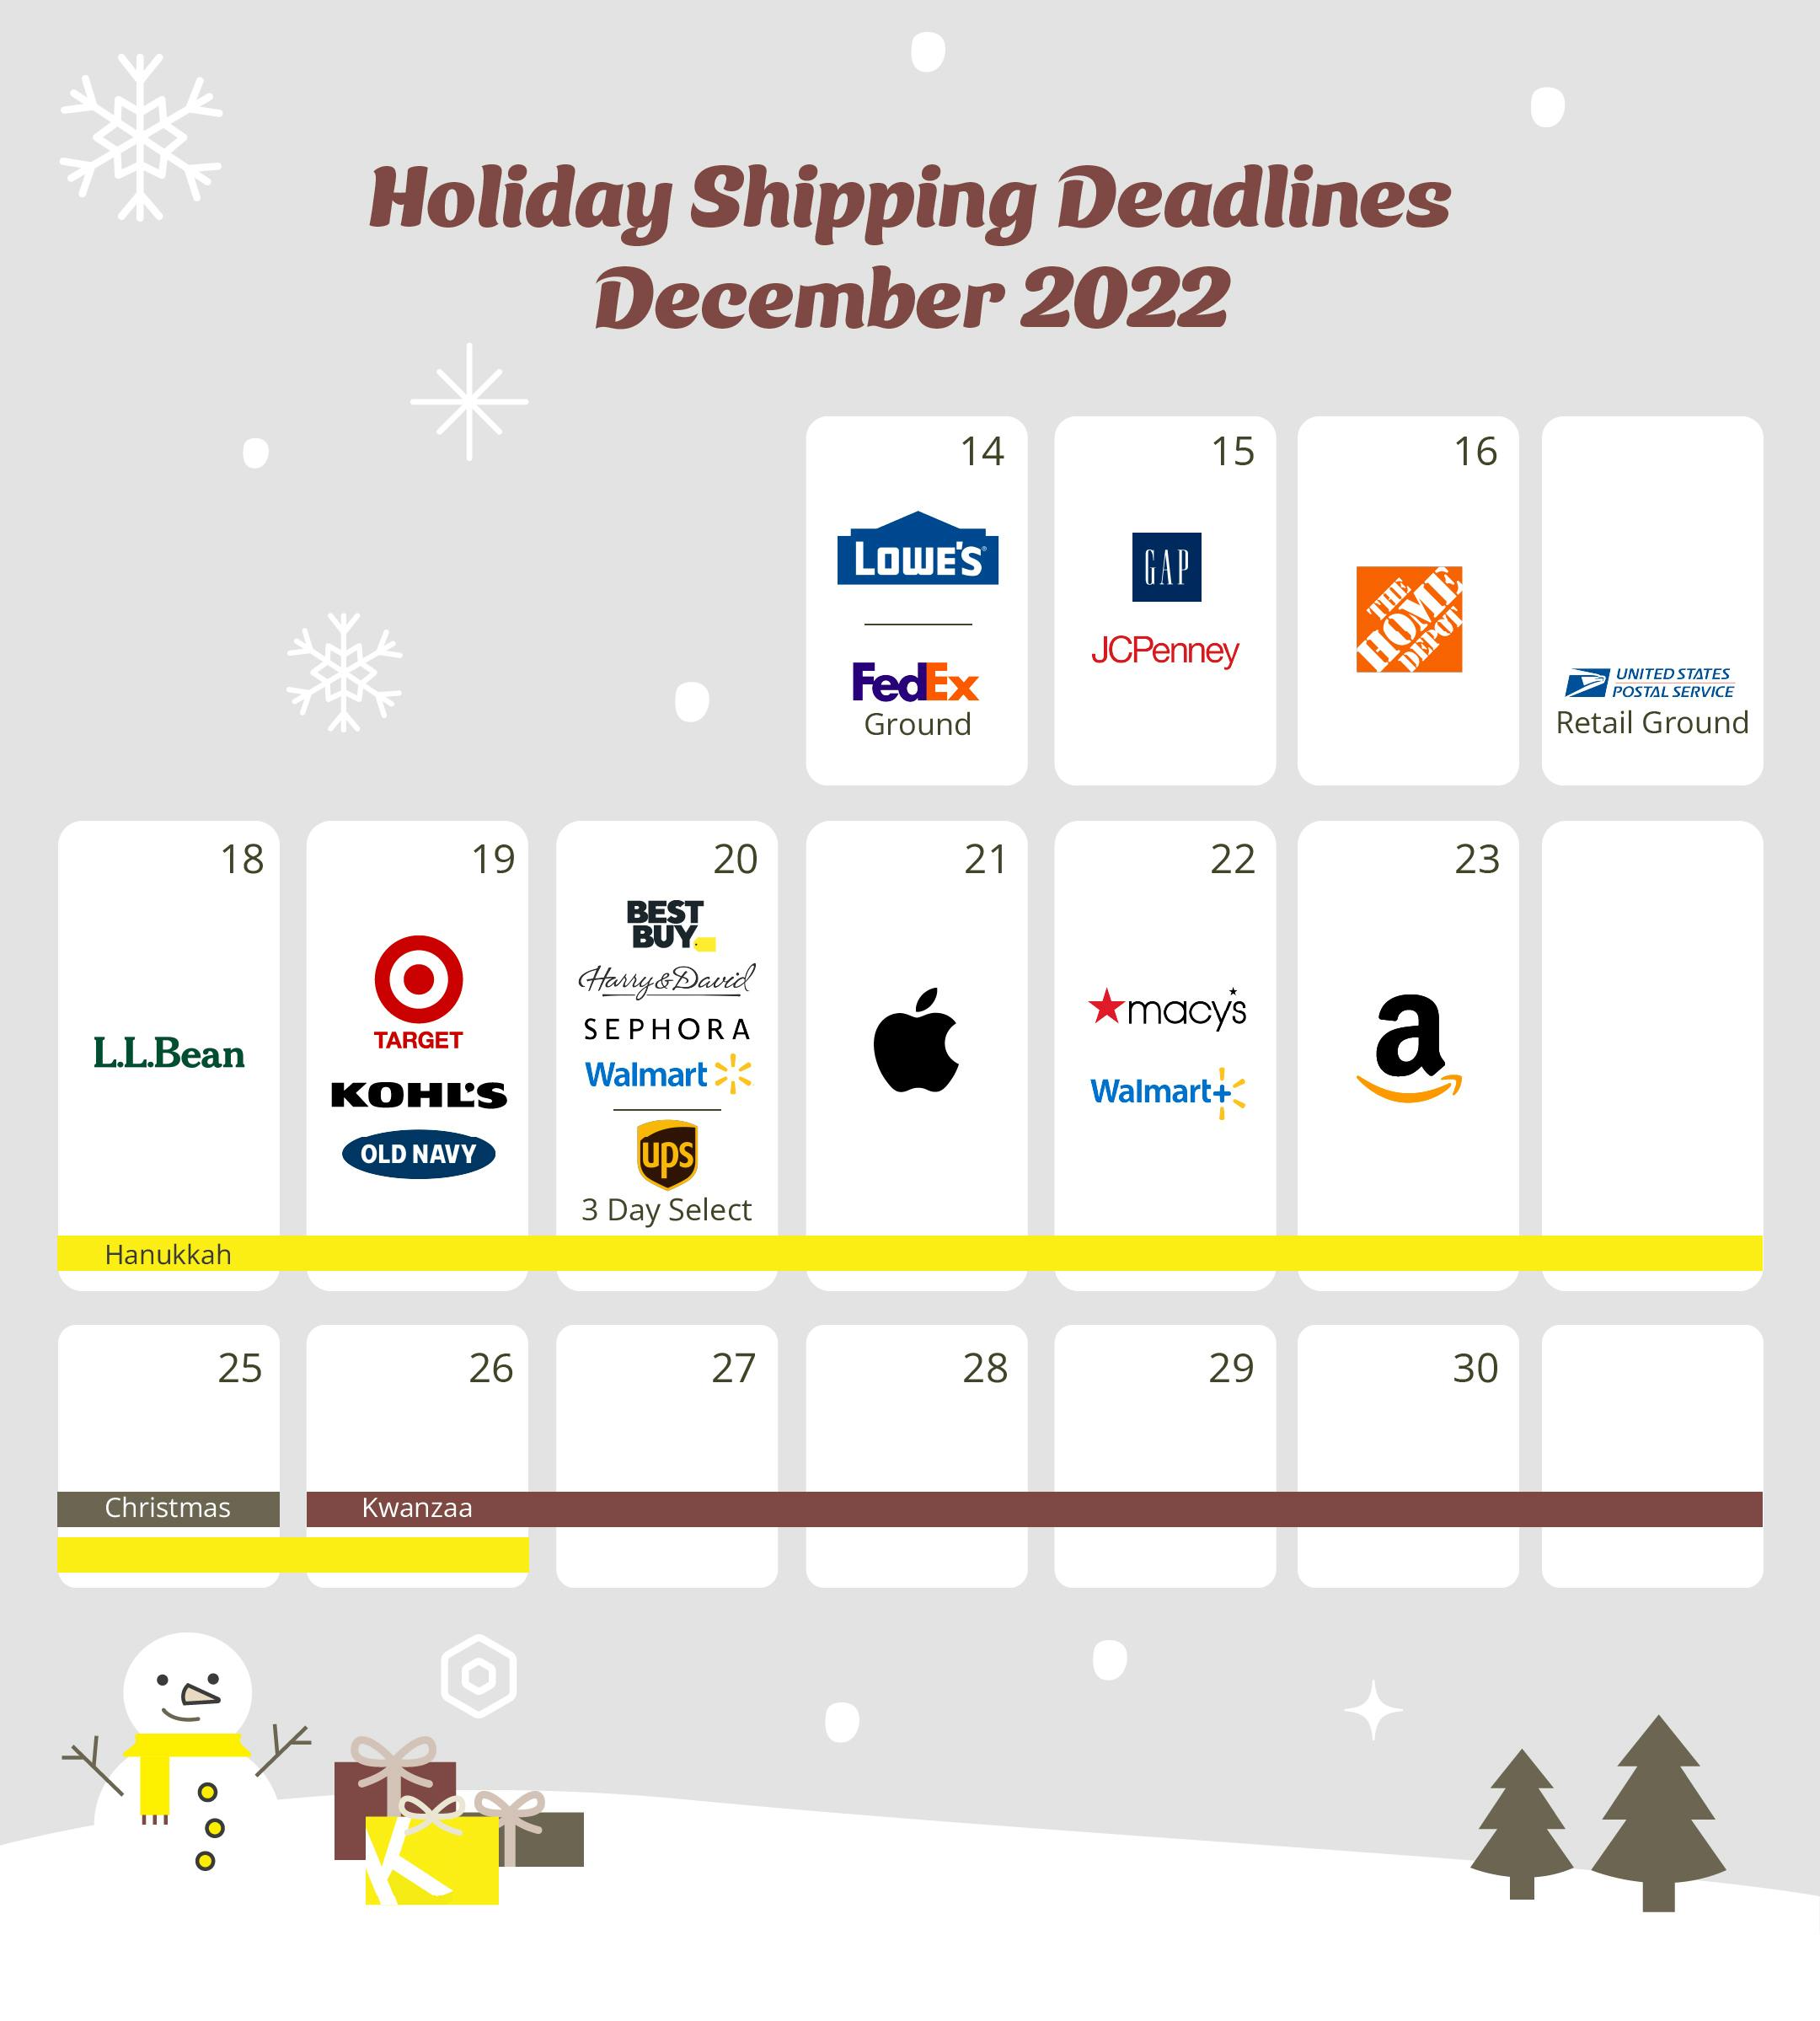 holiday shipping deadlines for december 2022 graphic